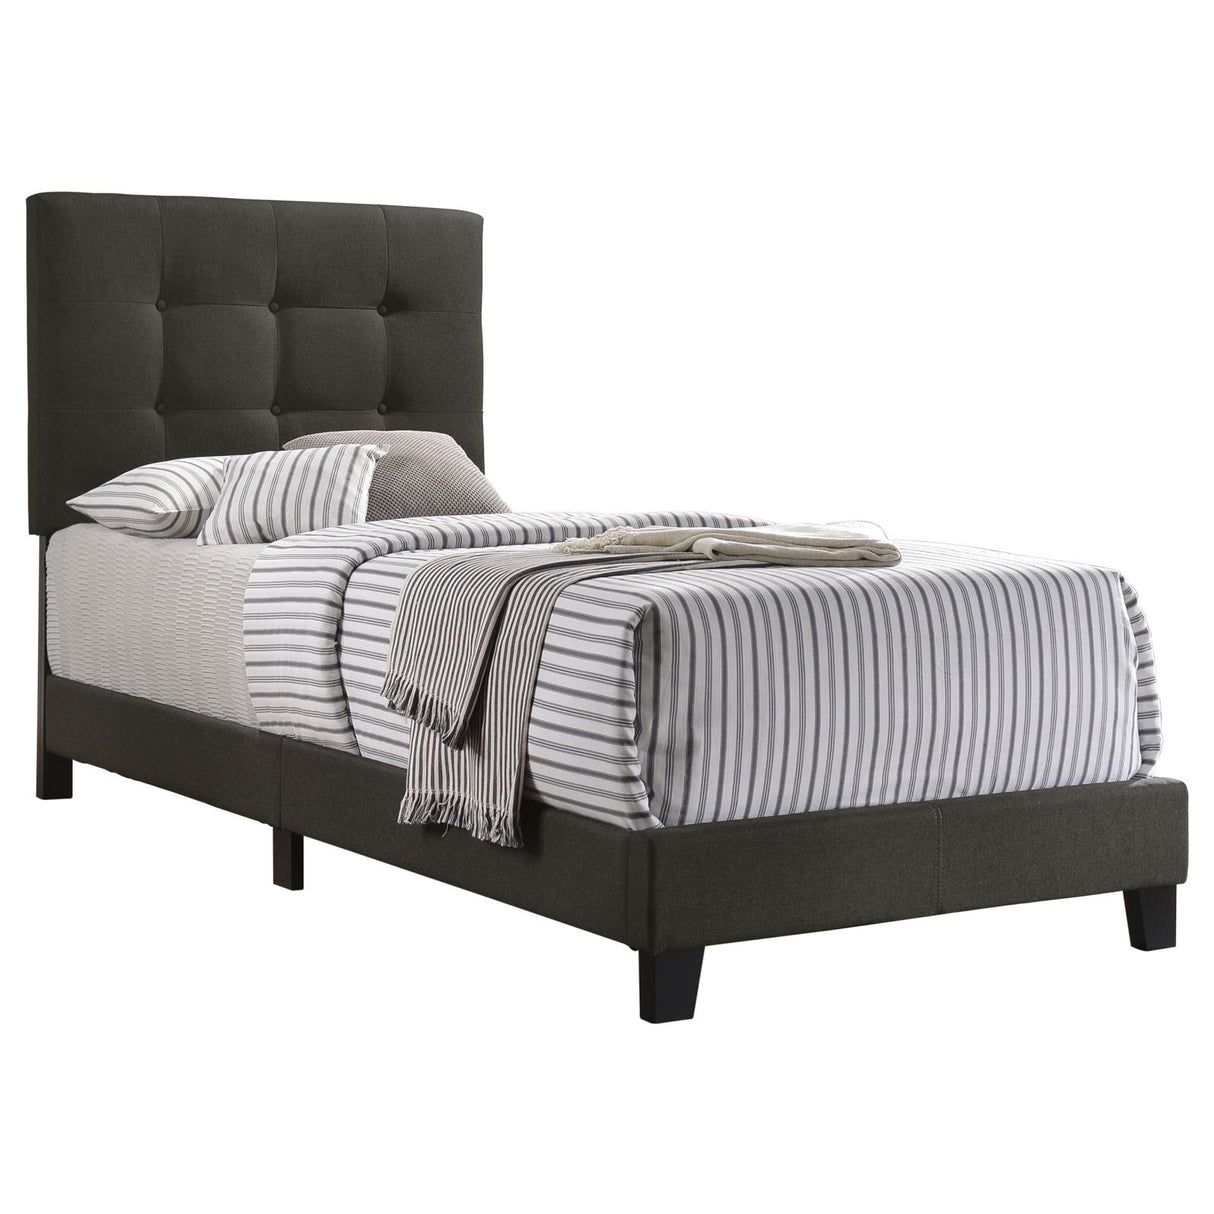 Mapes Tufted Upholstered Twin Bed Charcoal - 305746T - Luna Furniture